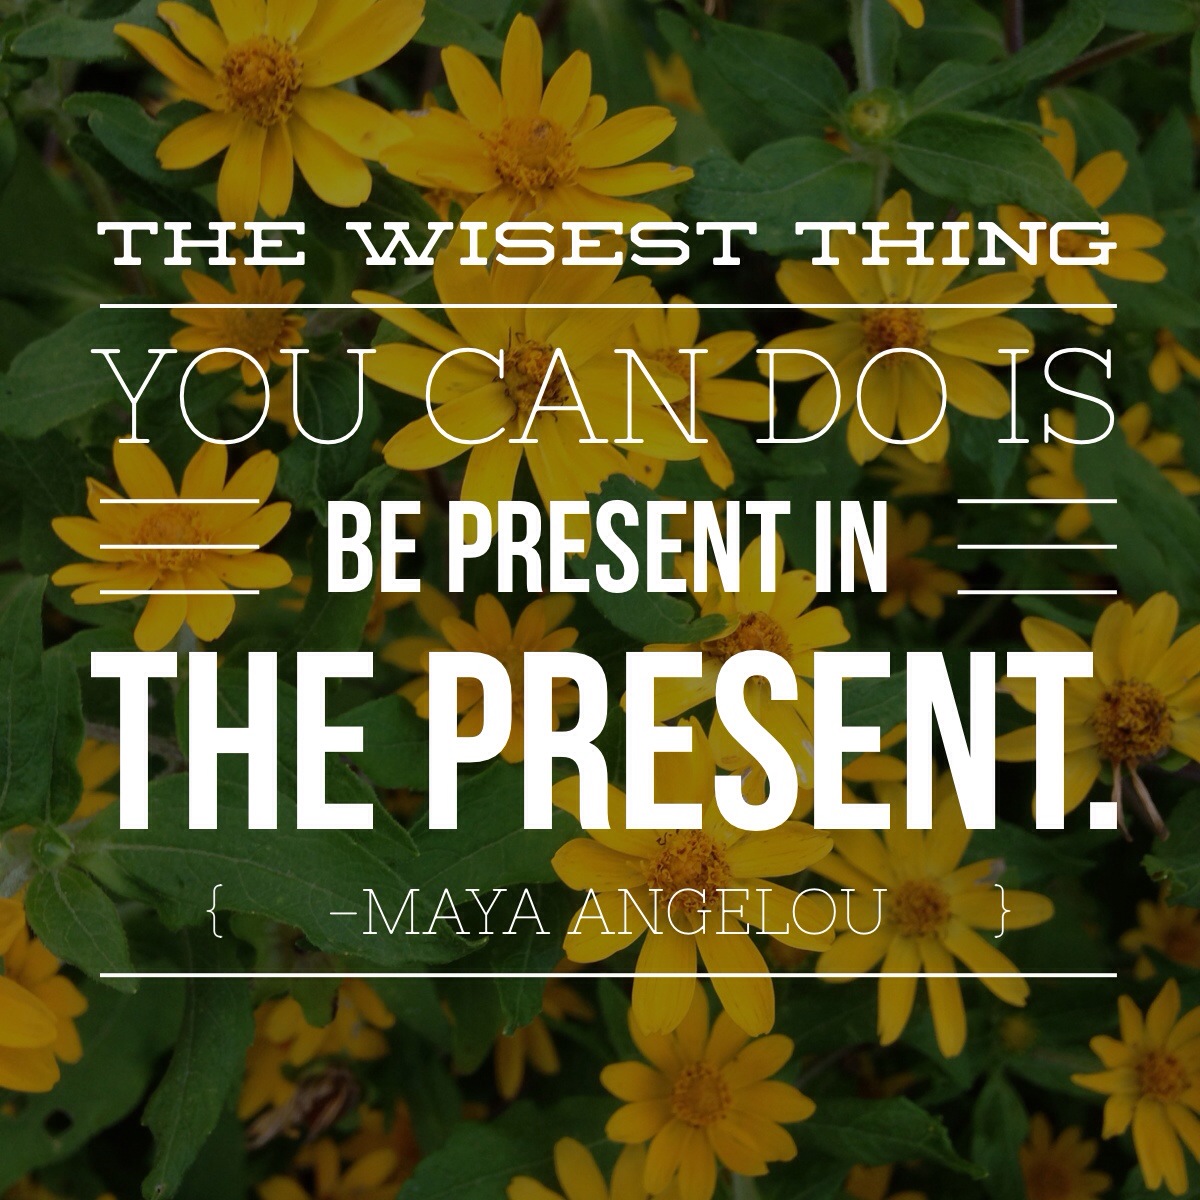 Be present in the present.